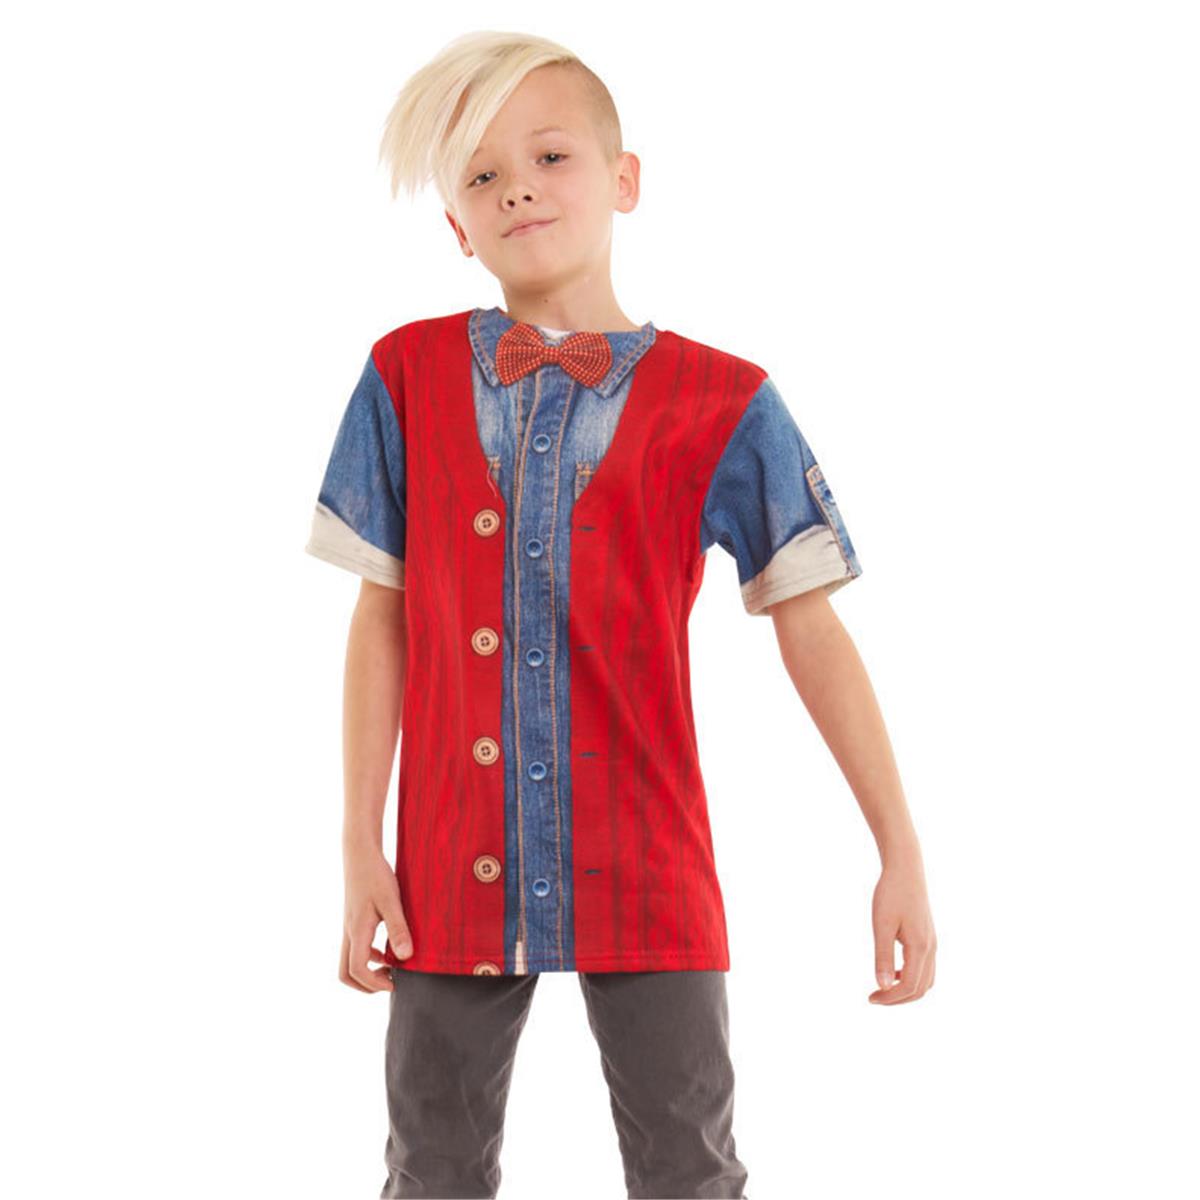 F134204-s Youth Hipster Cardigan & Denim Shirt Tee - Small